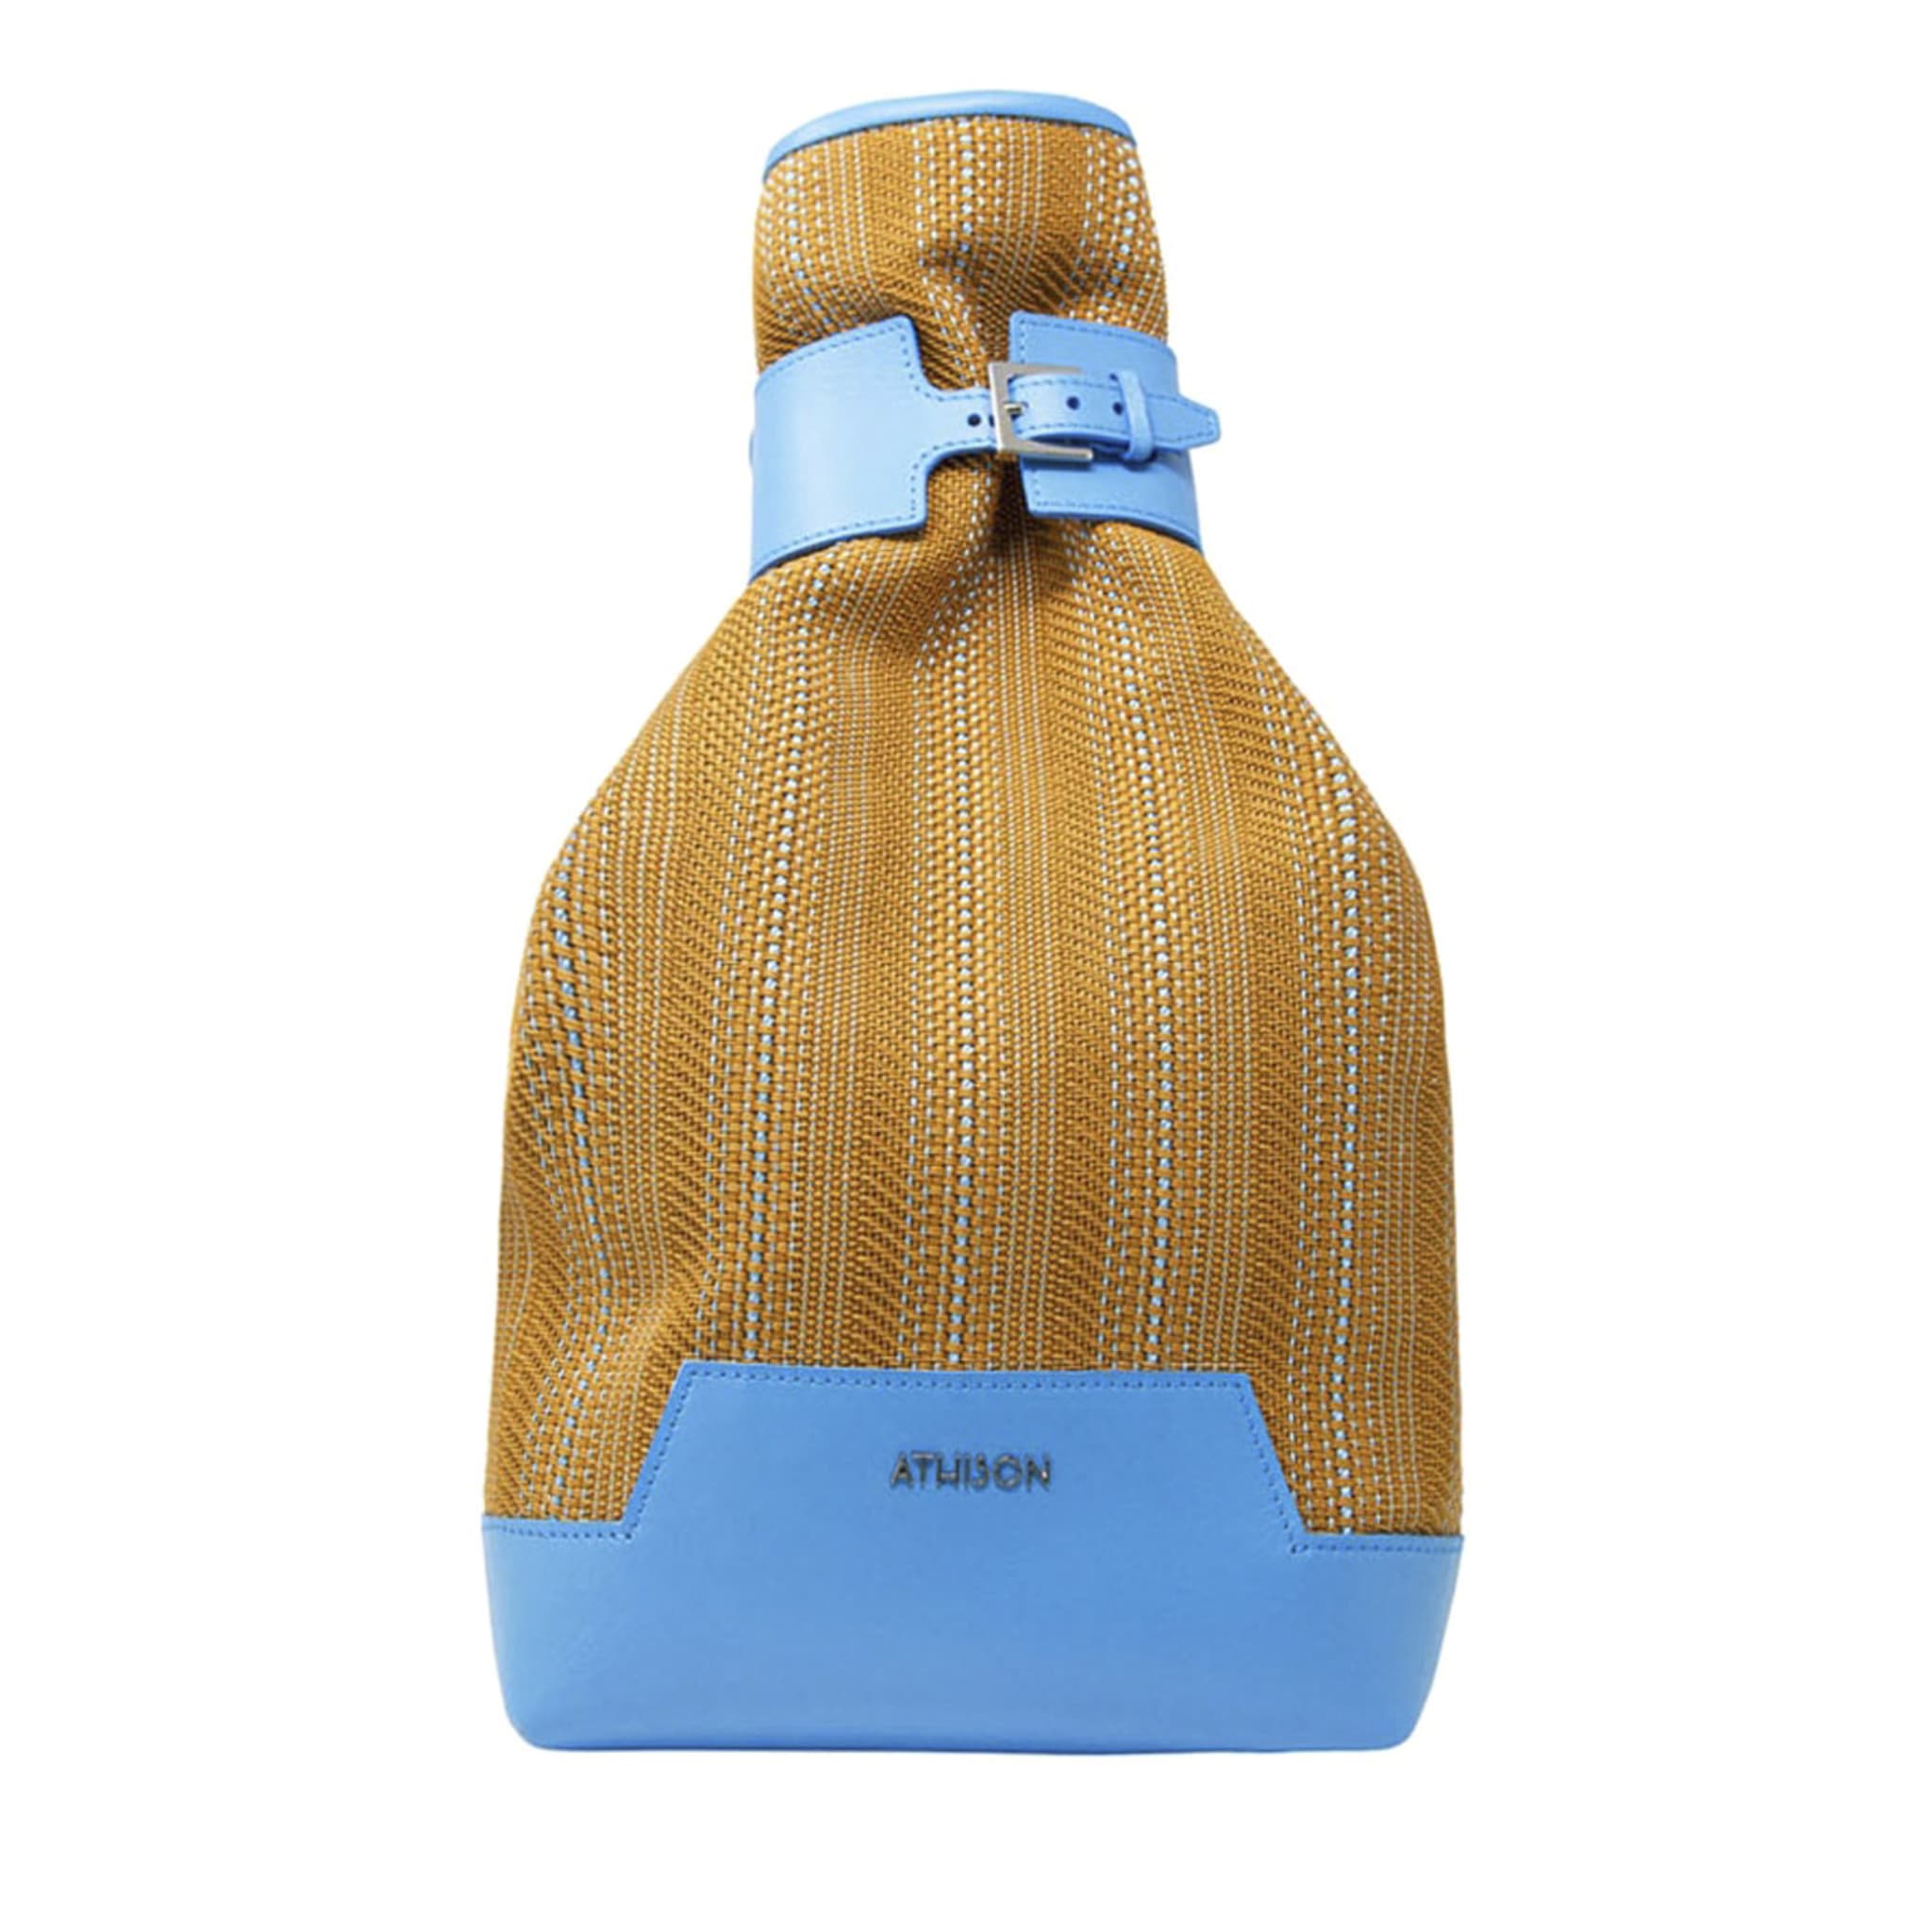 Leather and Braided Cotton Backpack “Veglia” - Mustard and Light Blue - Main view